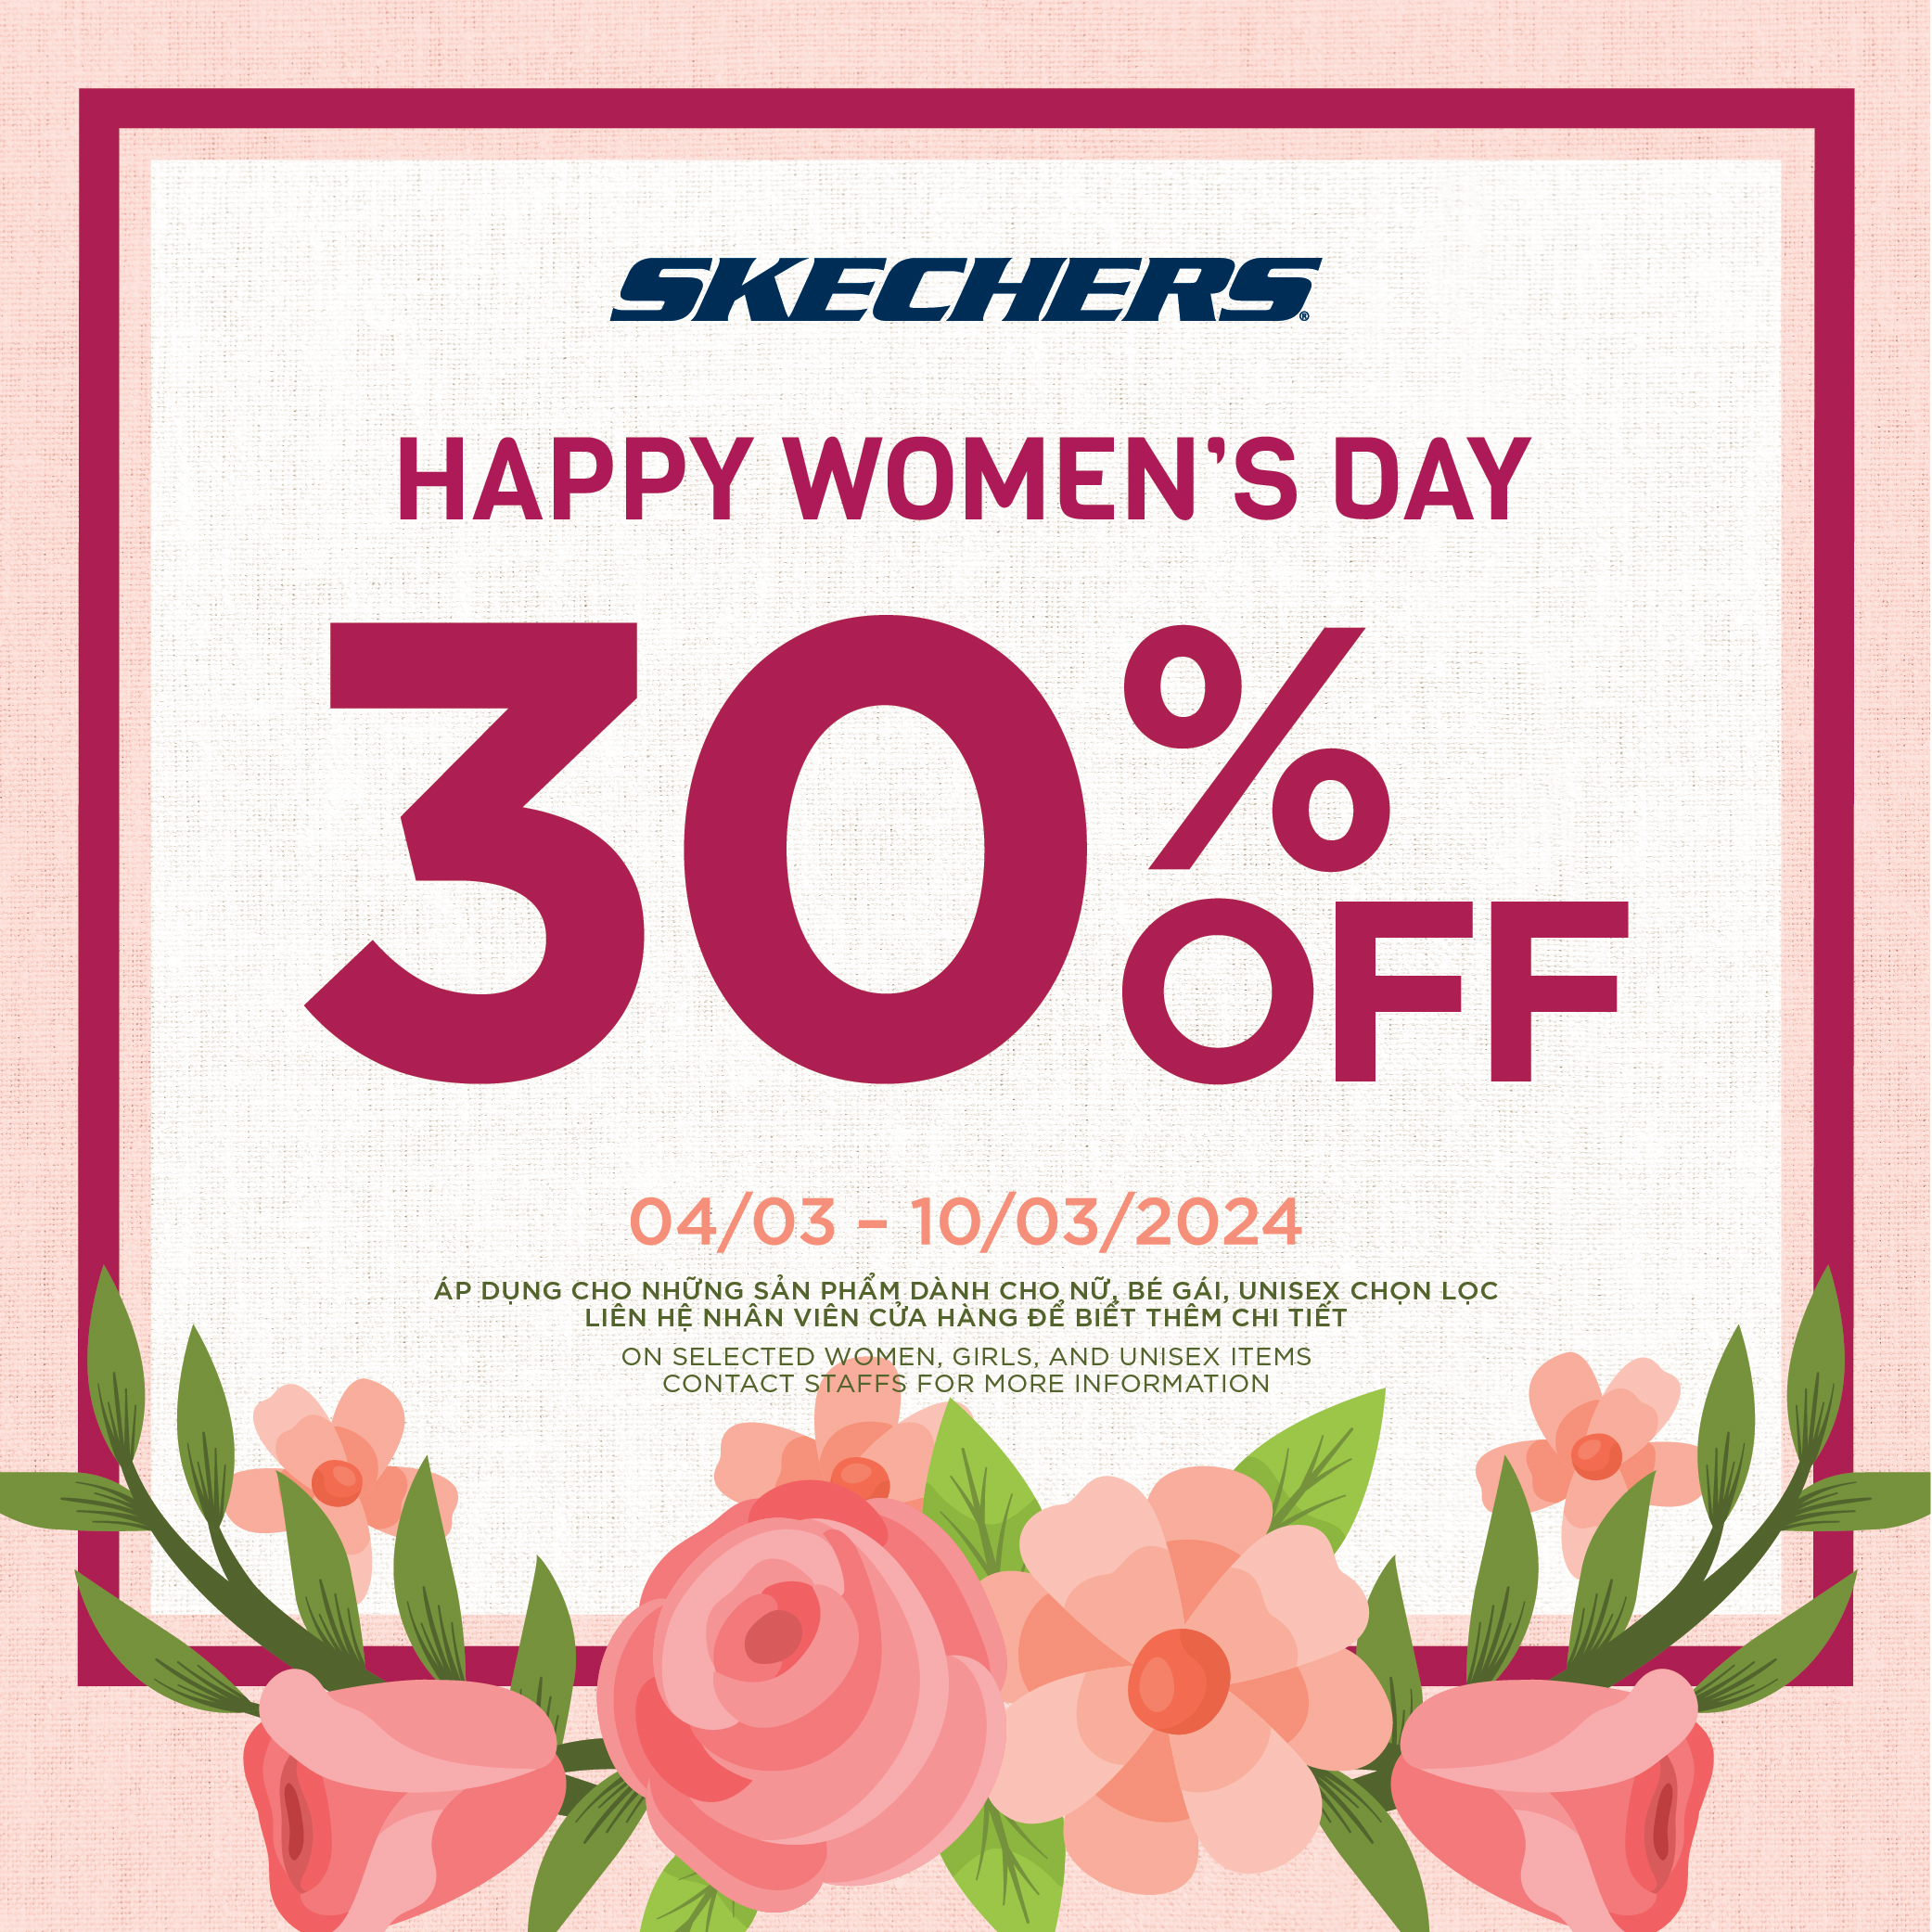 HAPPY WOMEN’S DAY - SPECIAL OFFERS FROM SKECHERS